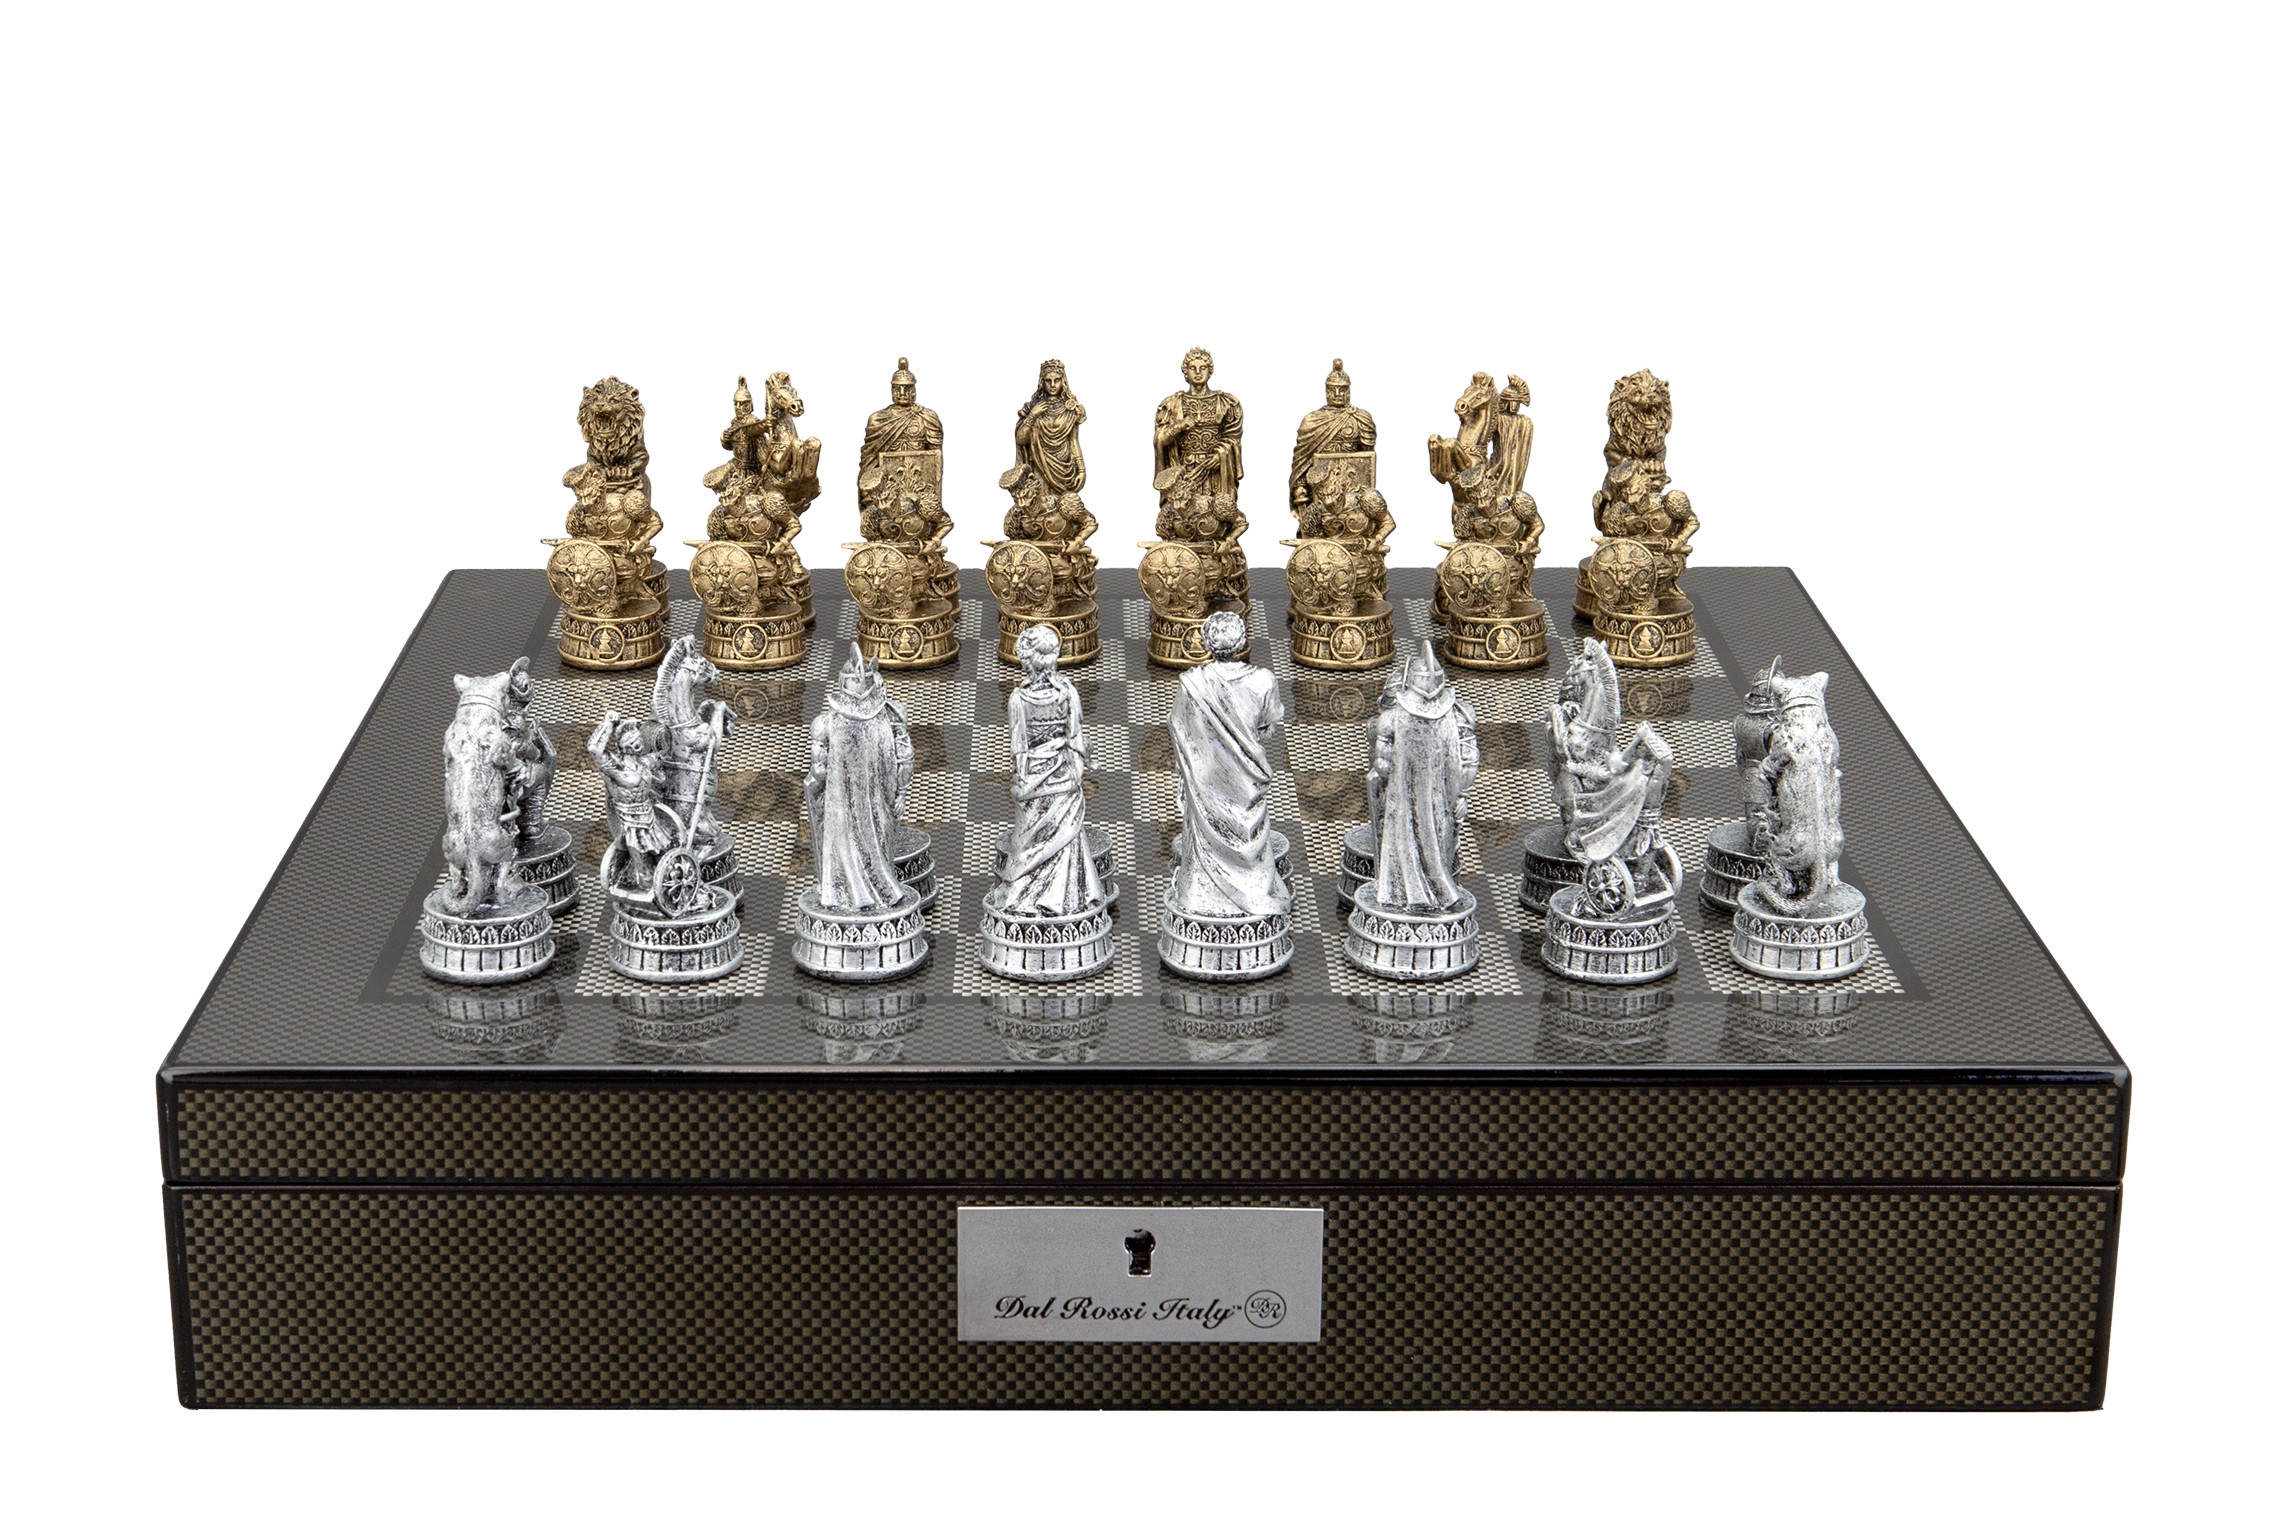 Dal Rossi Italy Roman Chessmen on a Carbon Fibre Finish Shiny Chess Box with Compartments 16"